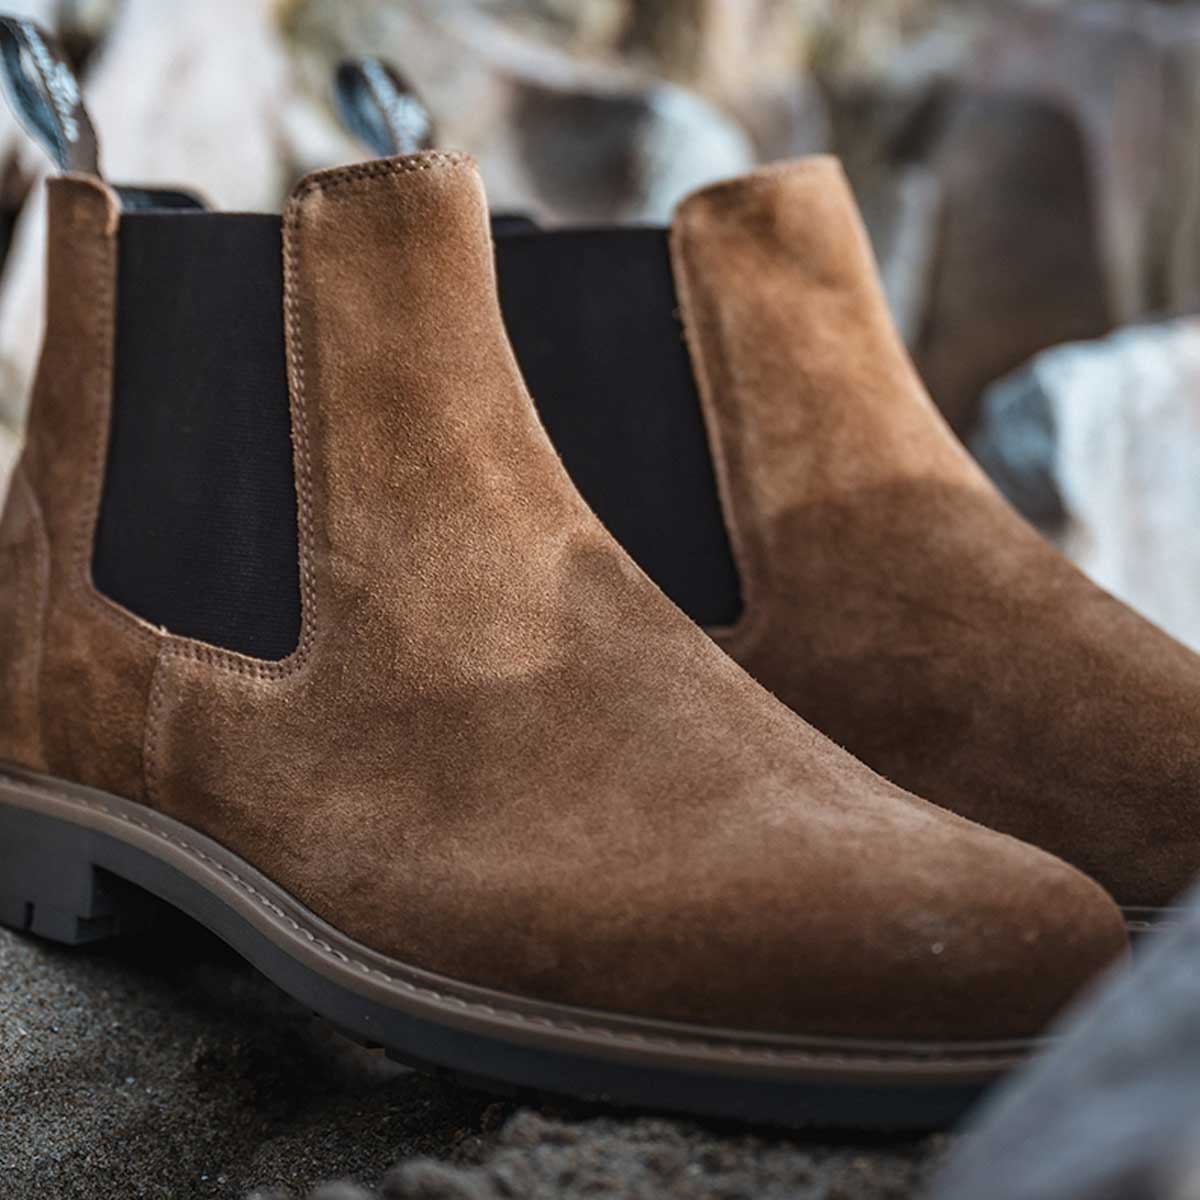 HOGGS OF FIFE Banff Country Dealer Boots - Men's - Coffee Suede